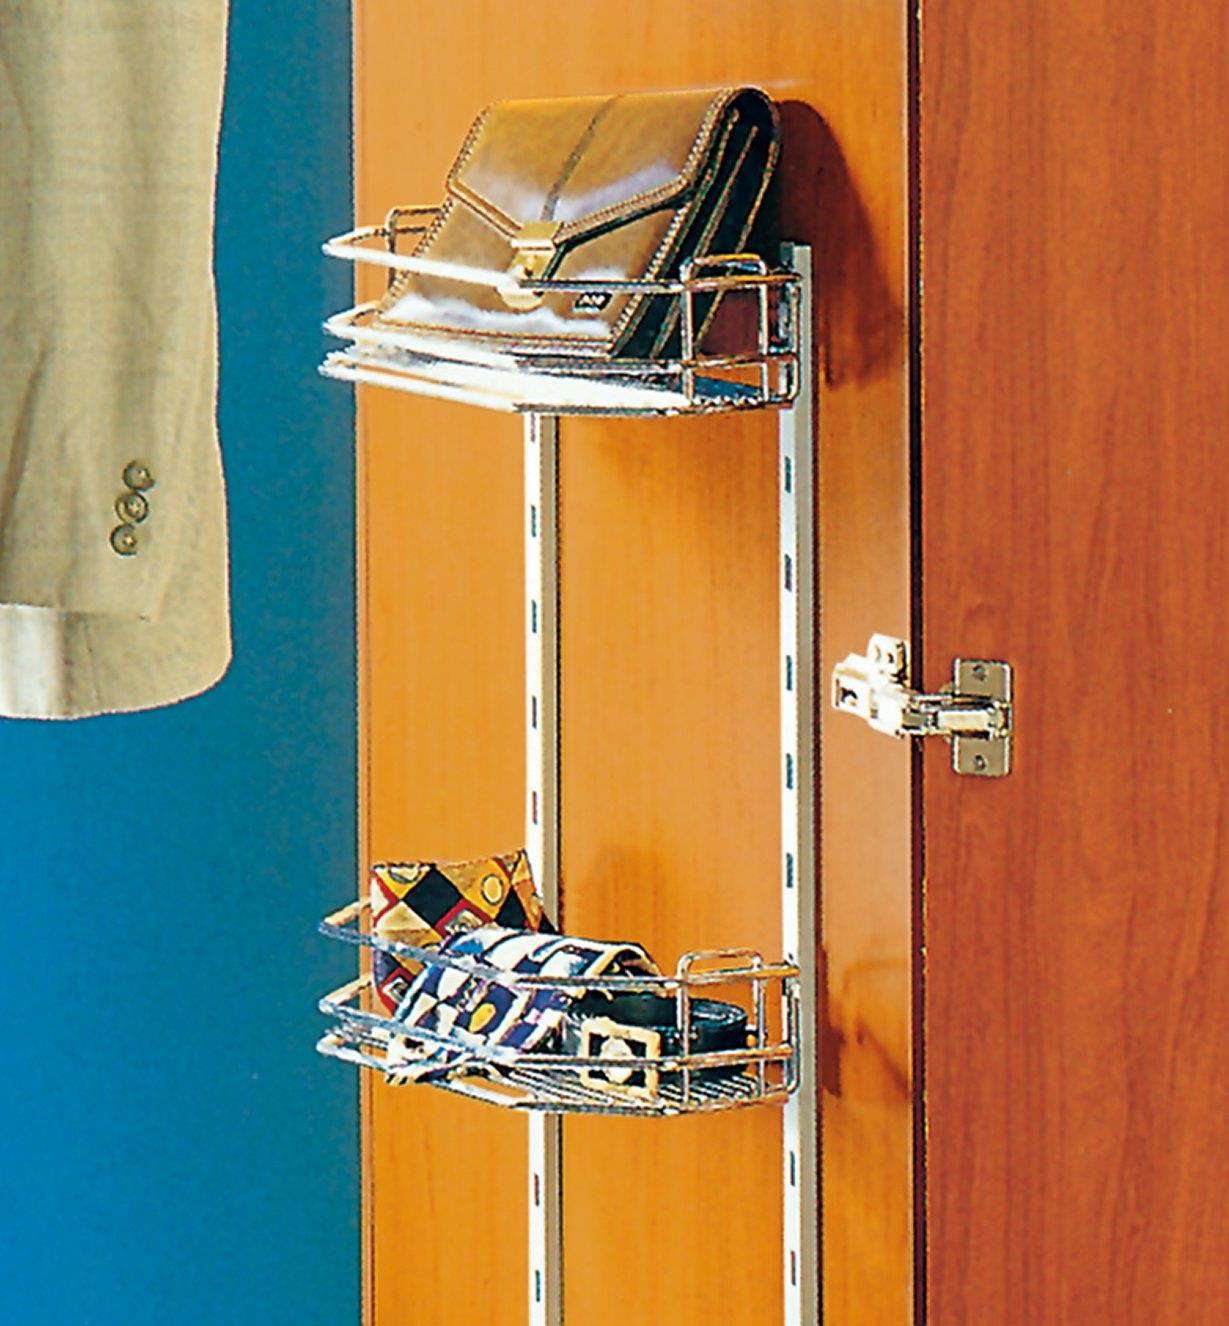 Wire Shelf System mounted inside a wardrobe door, holding a purse, belt and ties